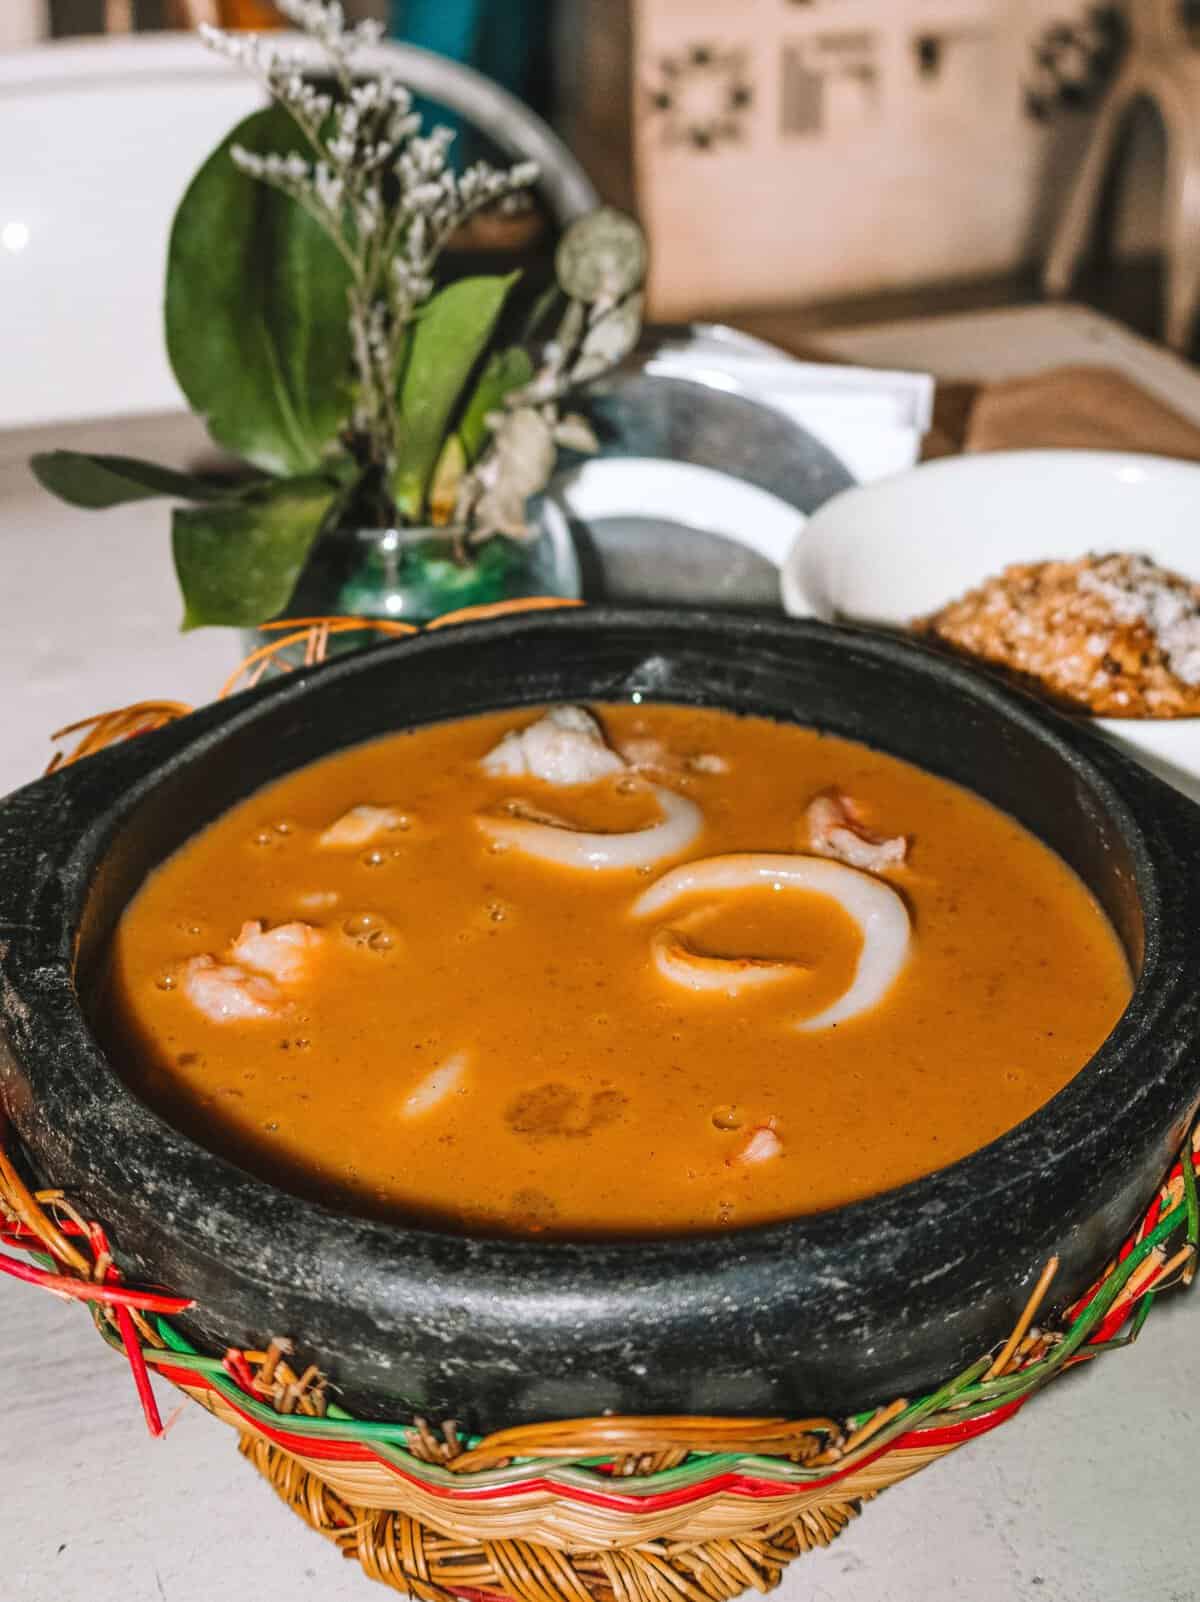 A piping hot bowl of seafood soup from LaMart in Santa Marta.